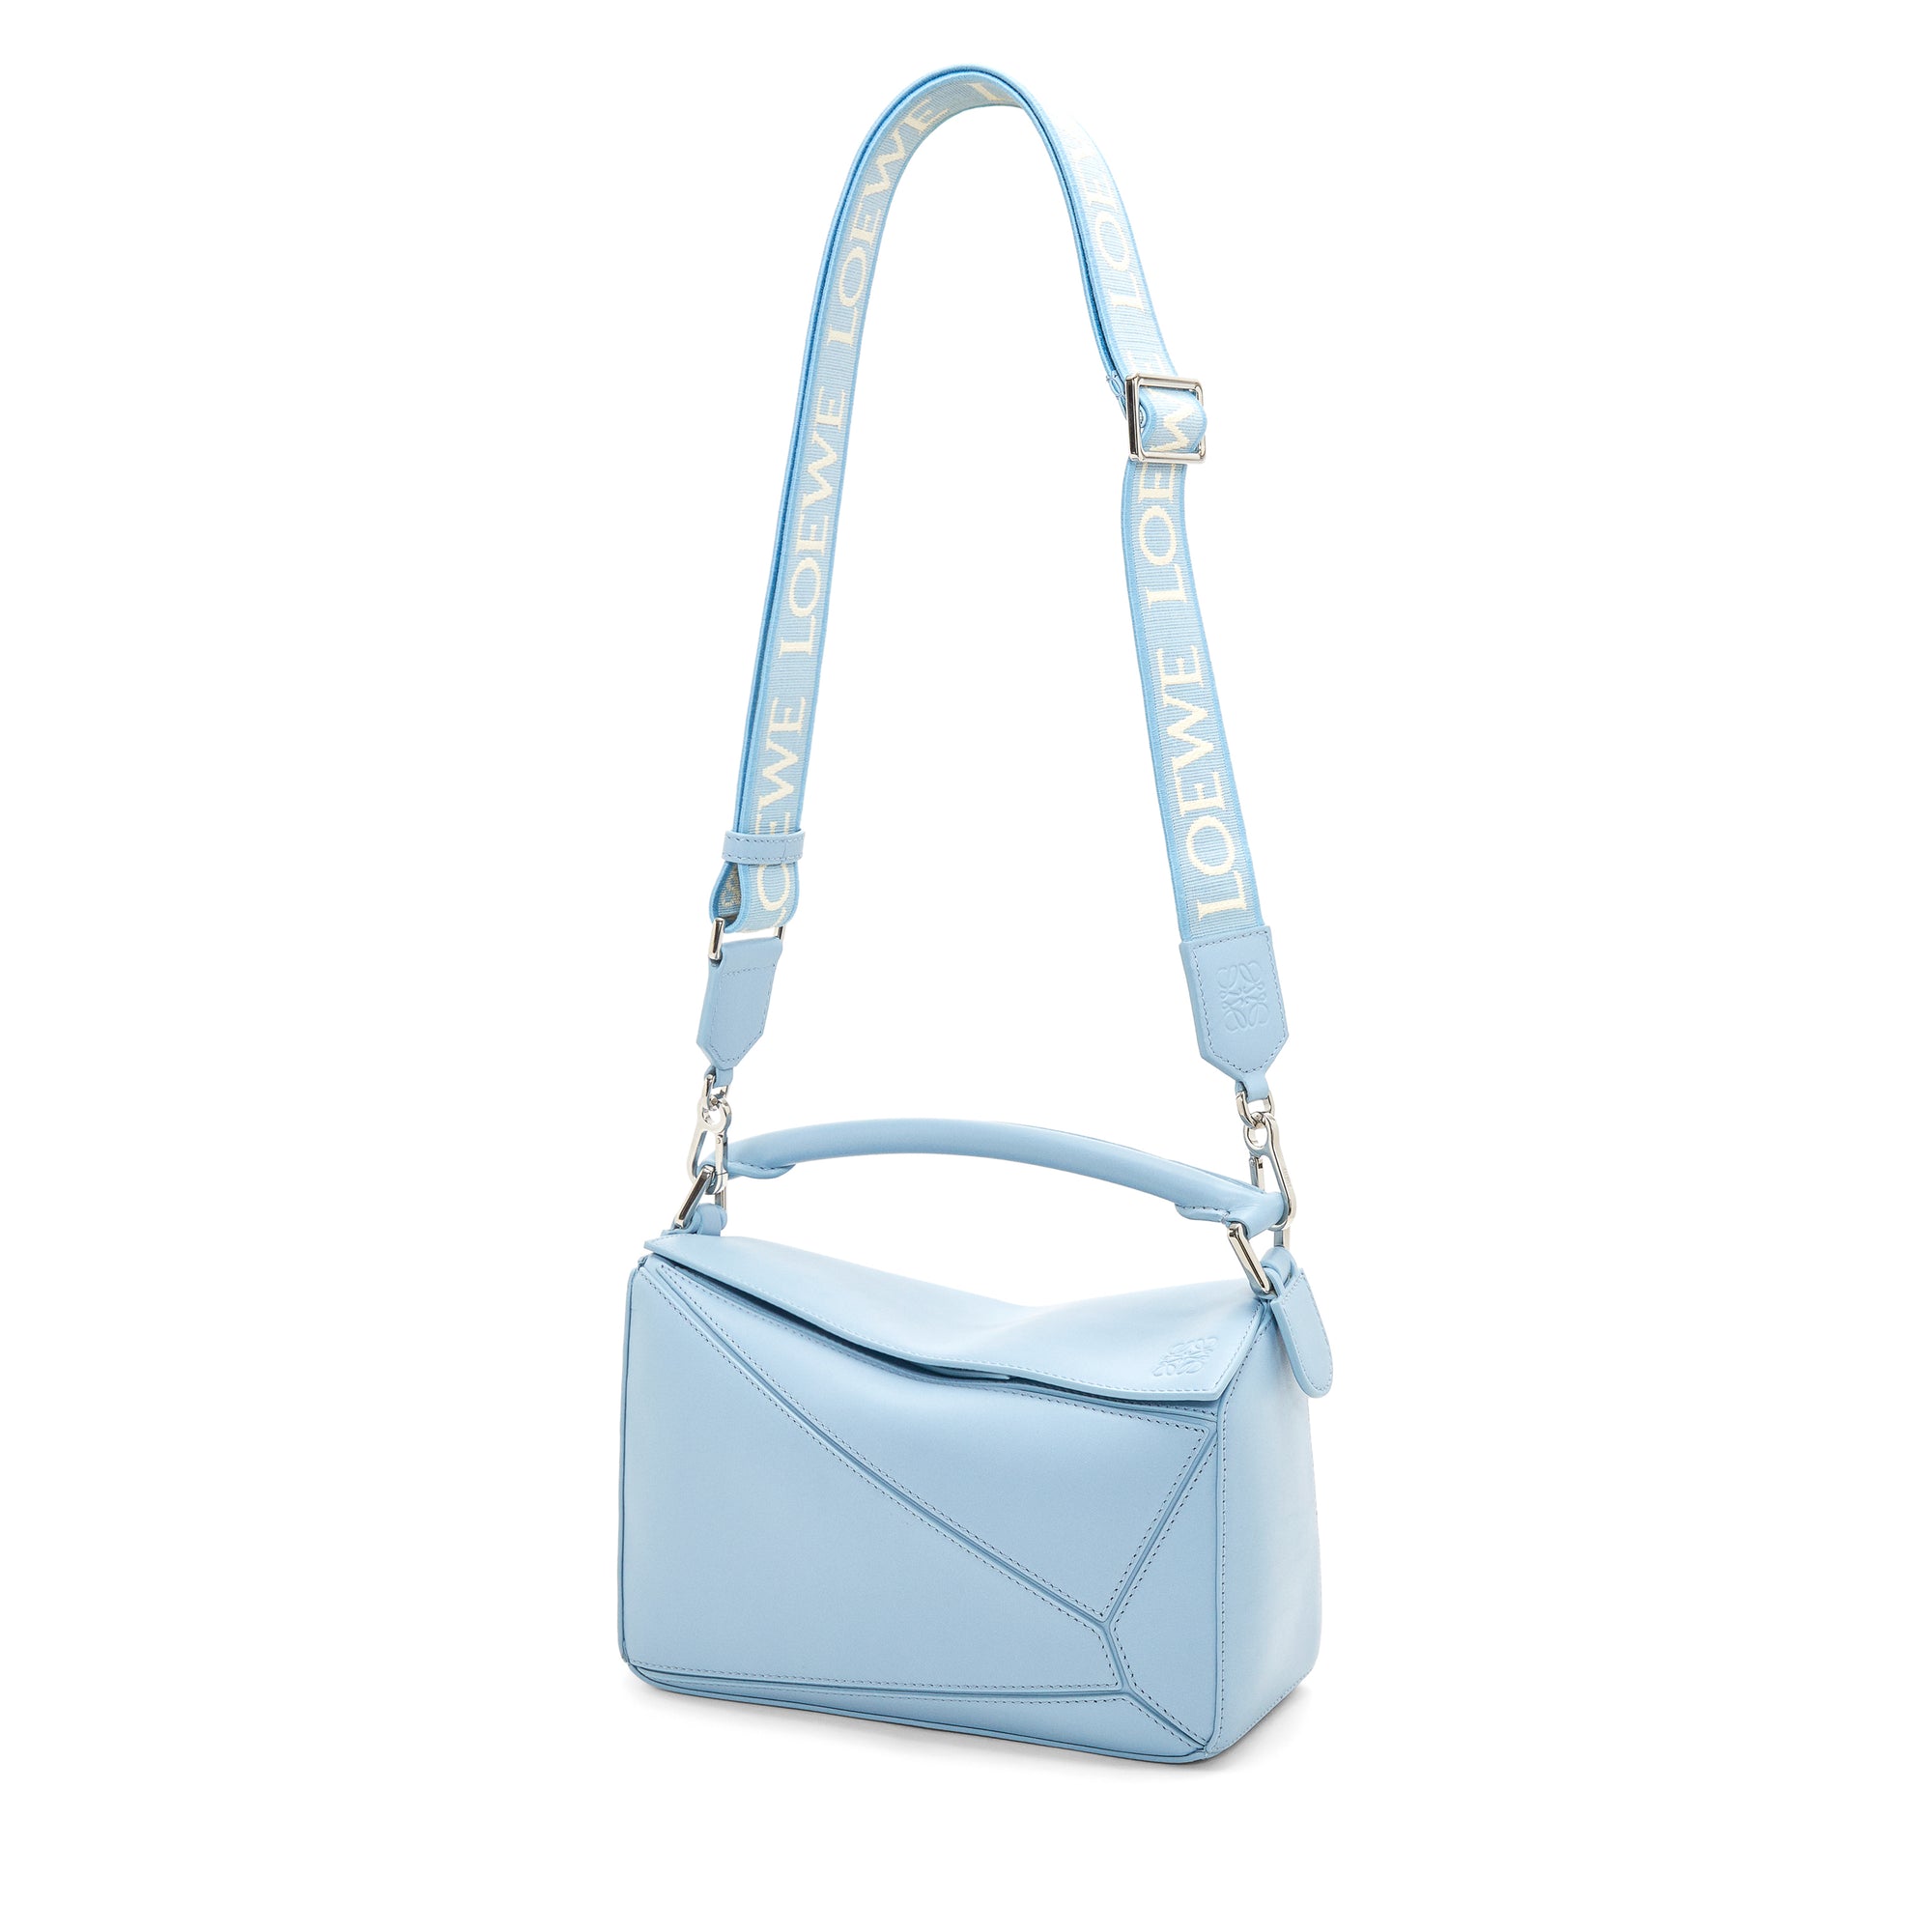 Loewe - Women’s Puzzle Small Bag - (Dusty Blue) view 3